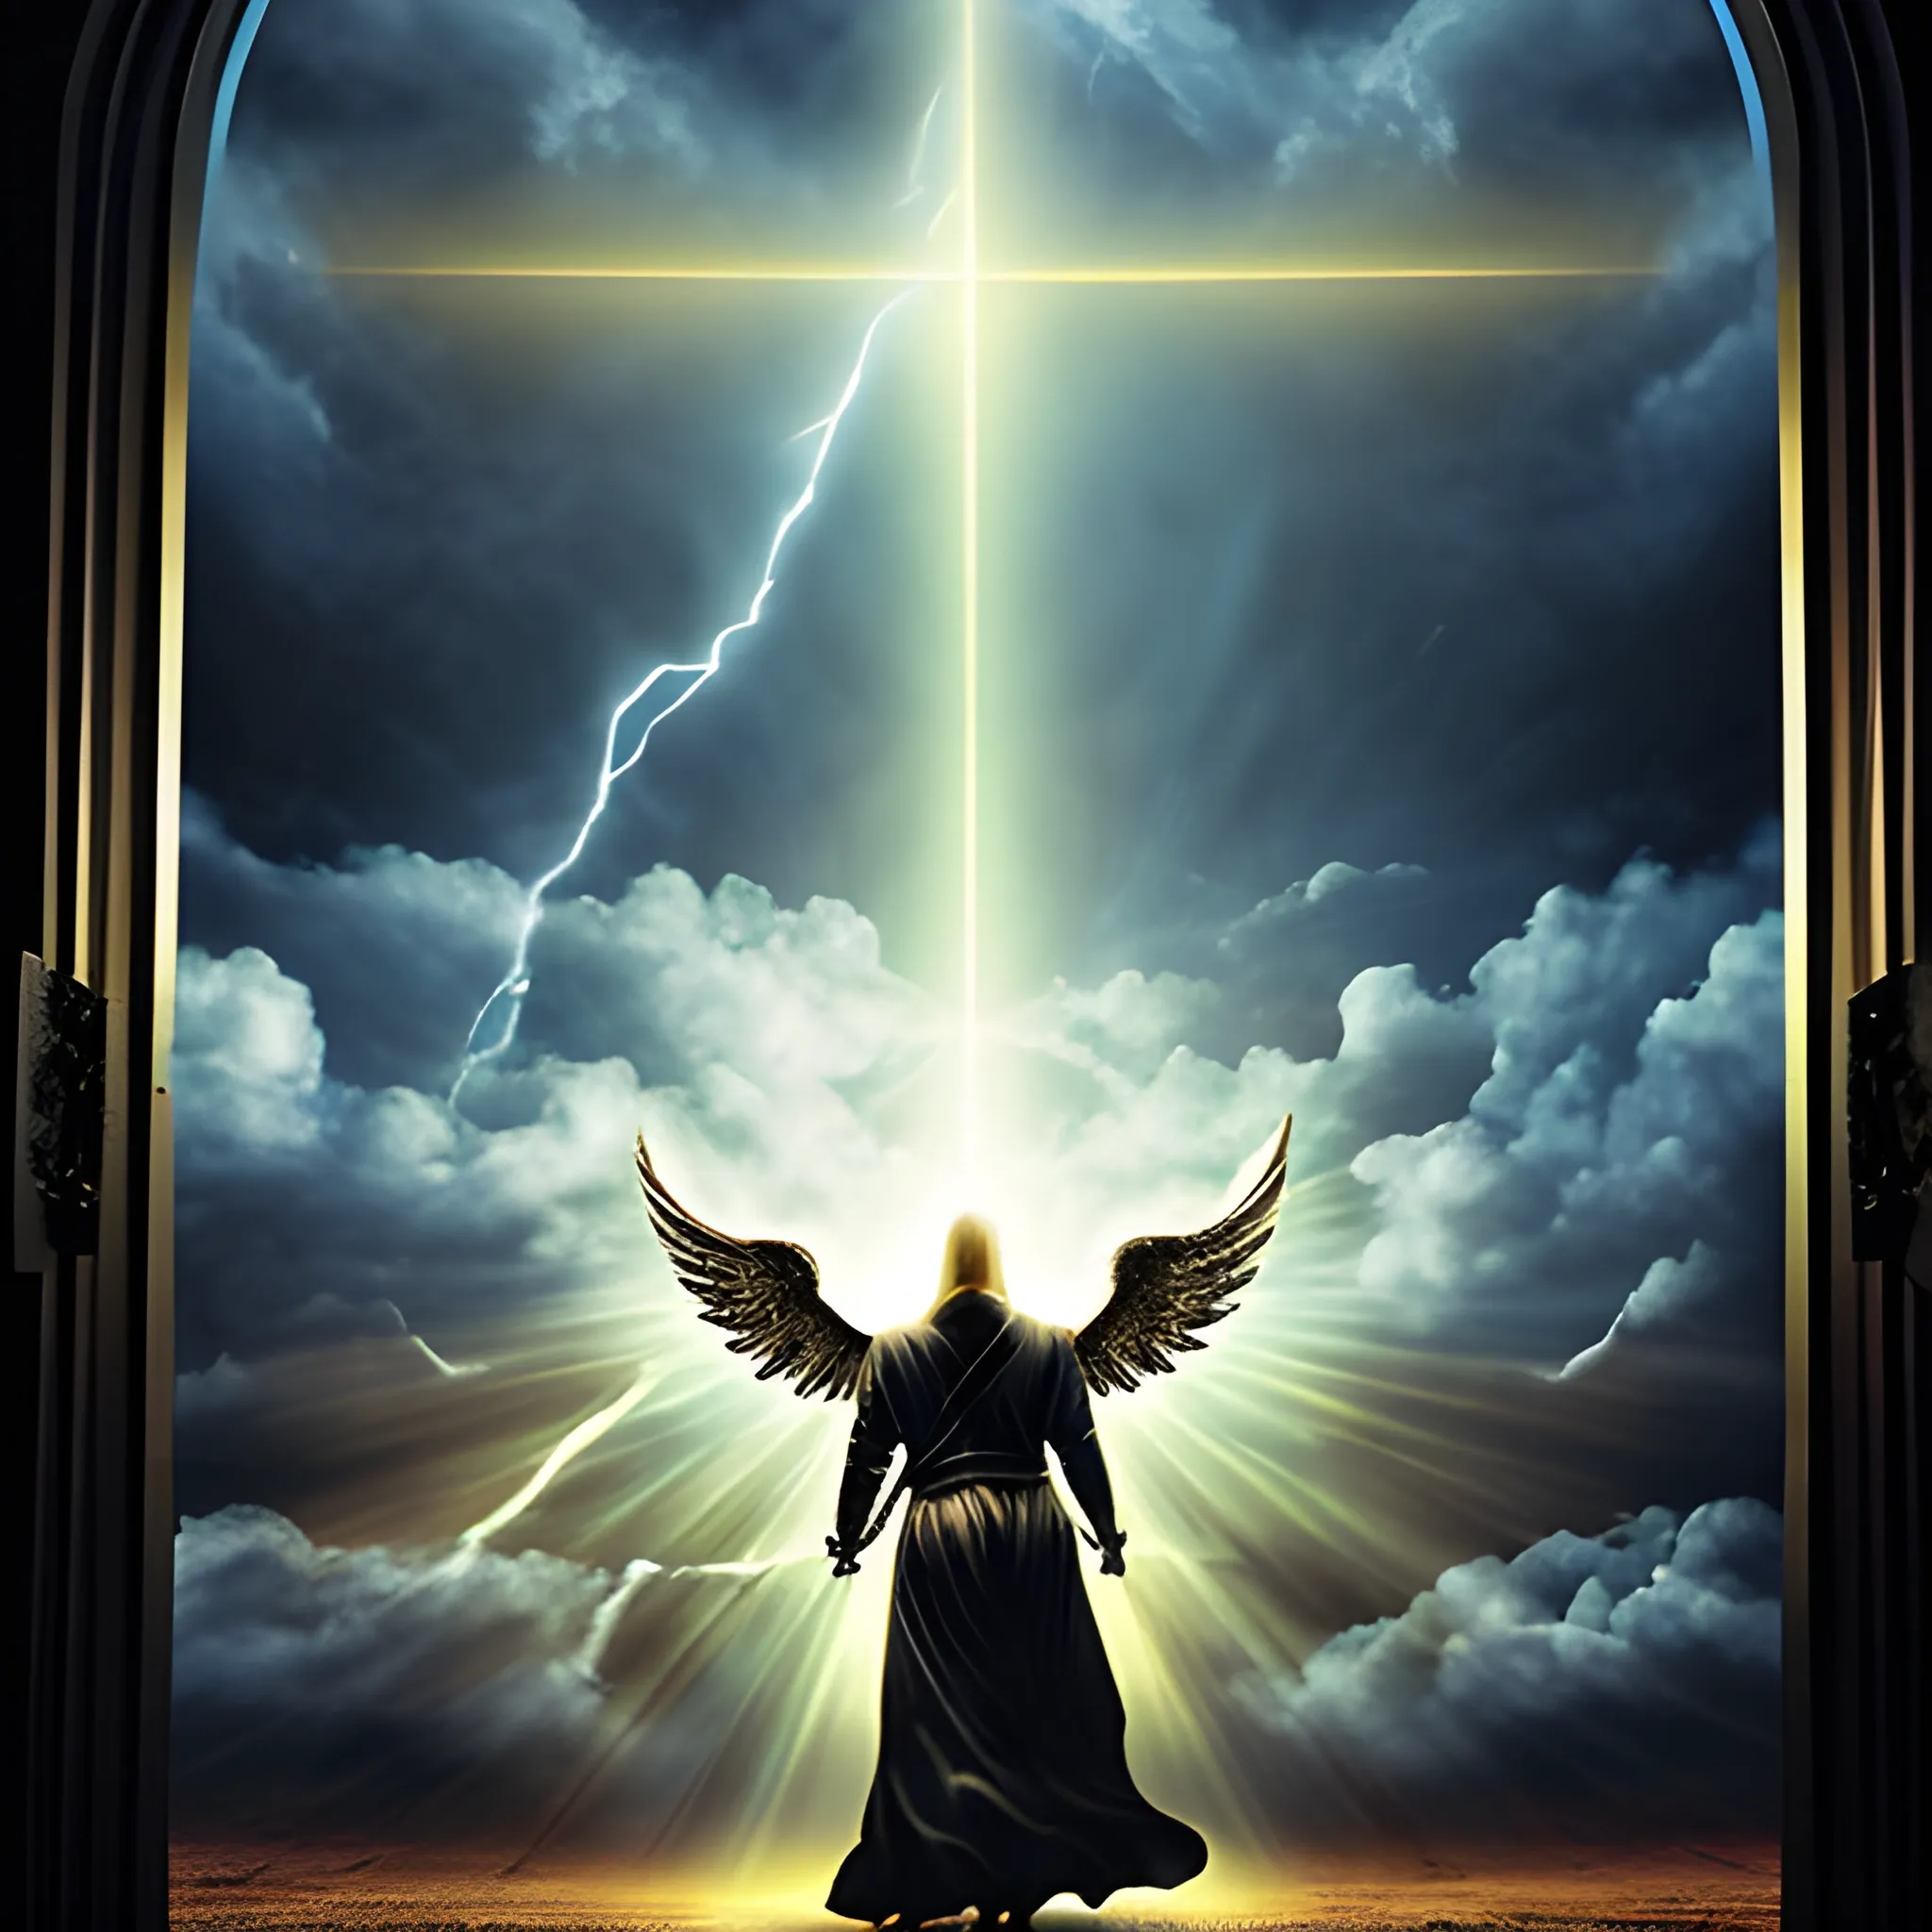 the angel of death entering the gates of heaven with his back turned. The sky with many clouds and with a flash of light, and the golden doors